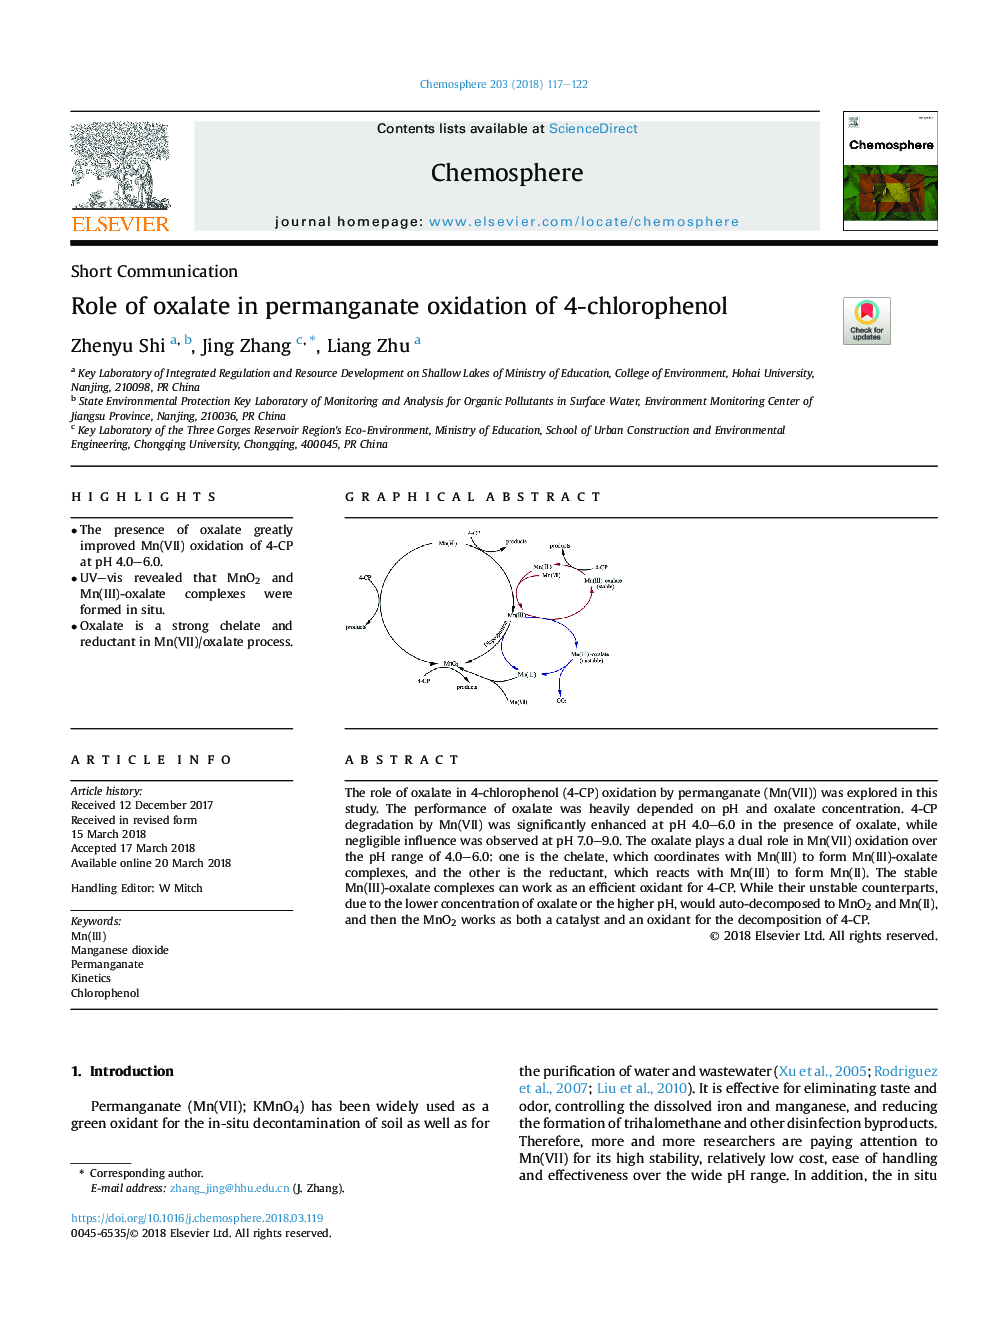 Role of oxalate in permanganate oxidation of 4-chlorophenol